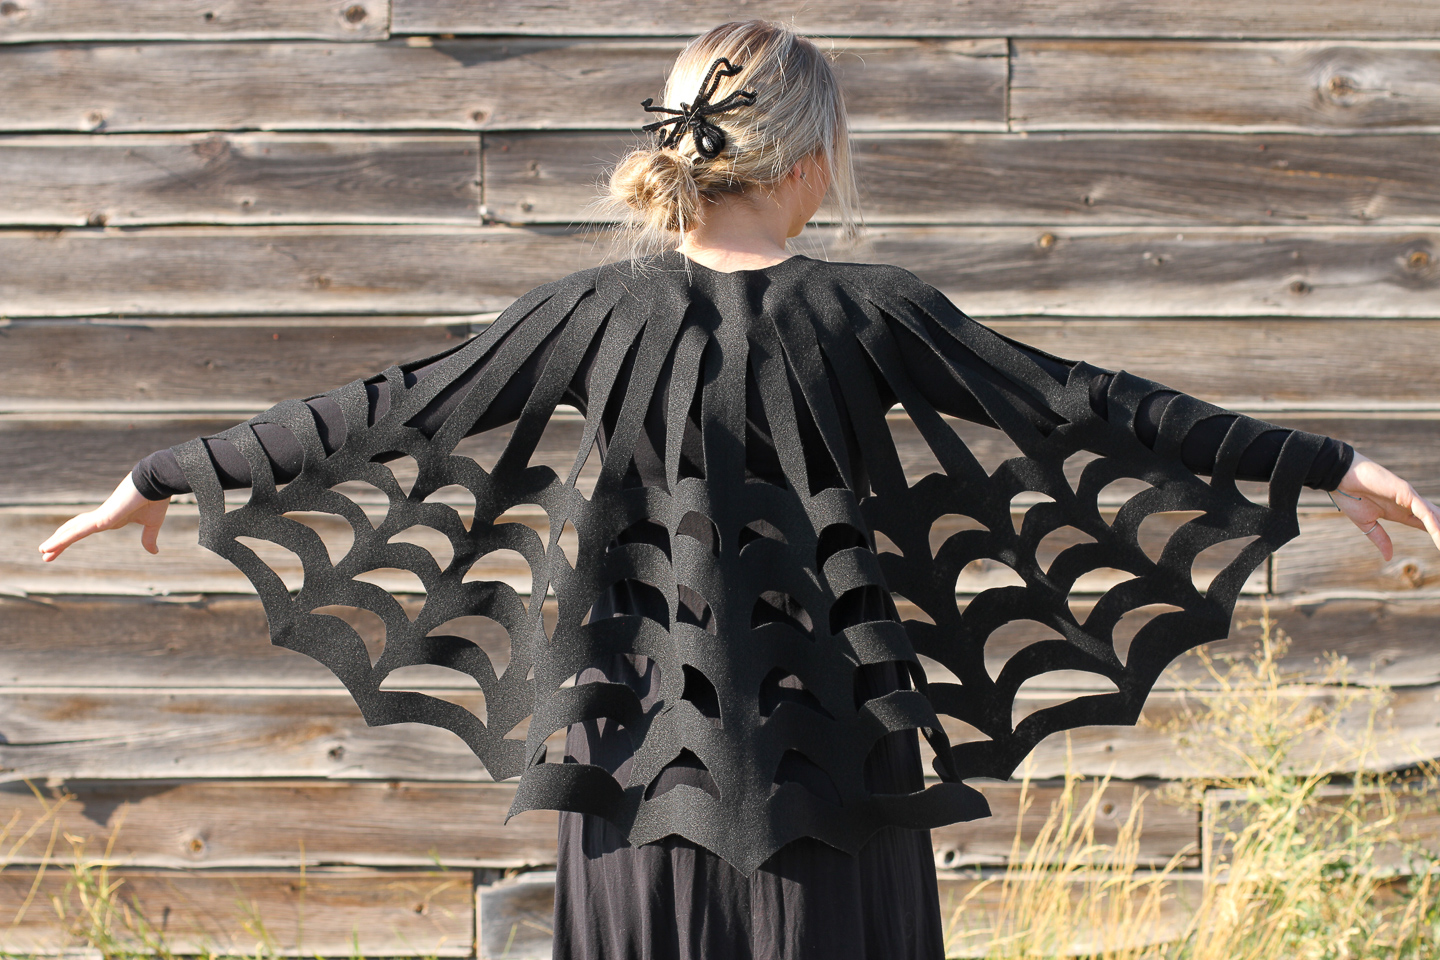 DIY Spider Web Costume: How to Make a Spider Web Poncho